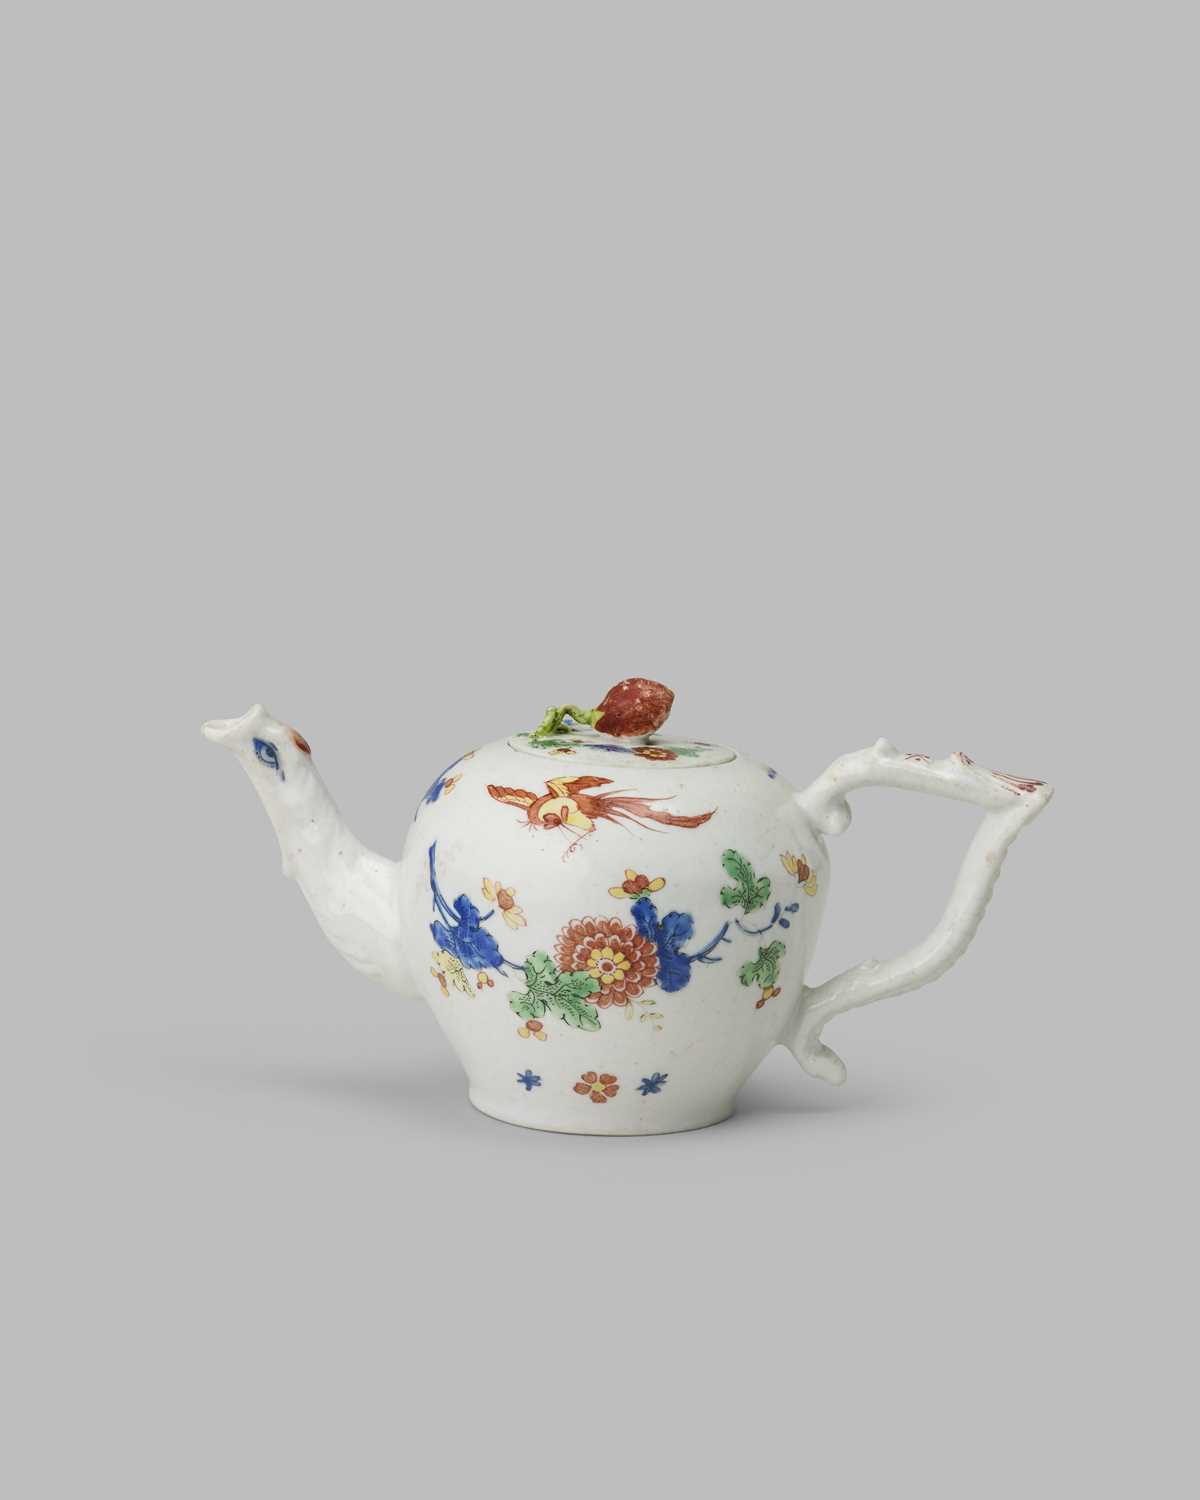 A rare and early Longton Hall teapot and cover, c.1752, modelled after Meissen with a small bullet-